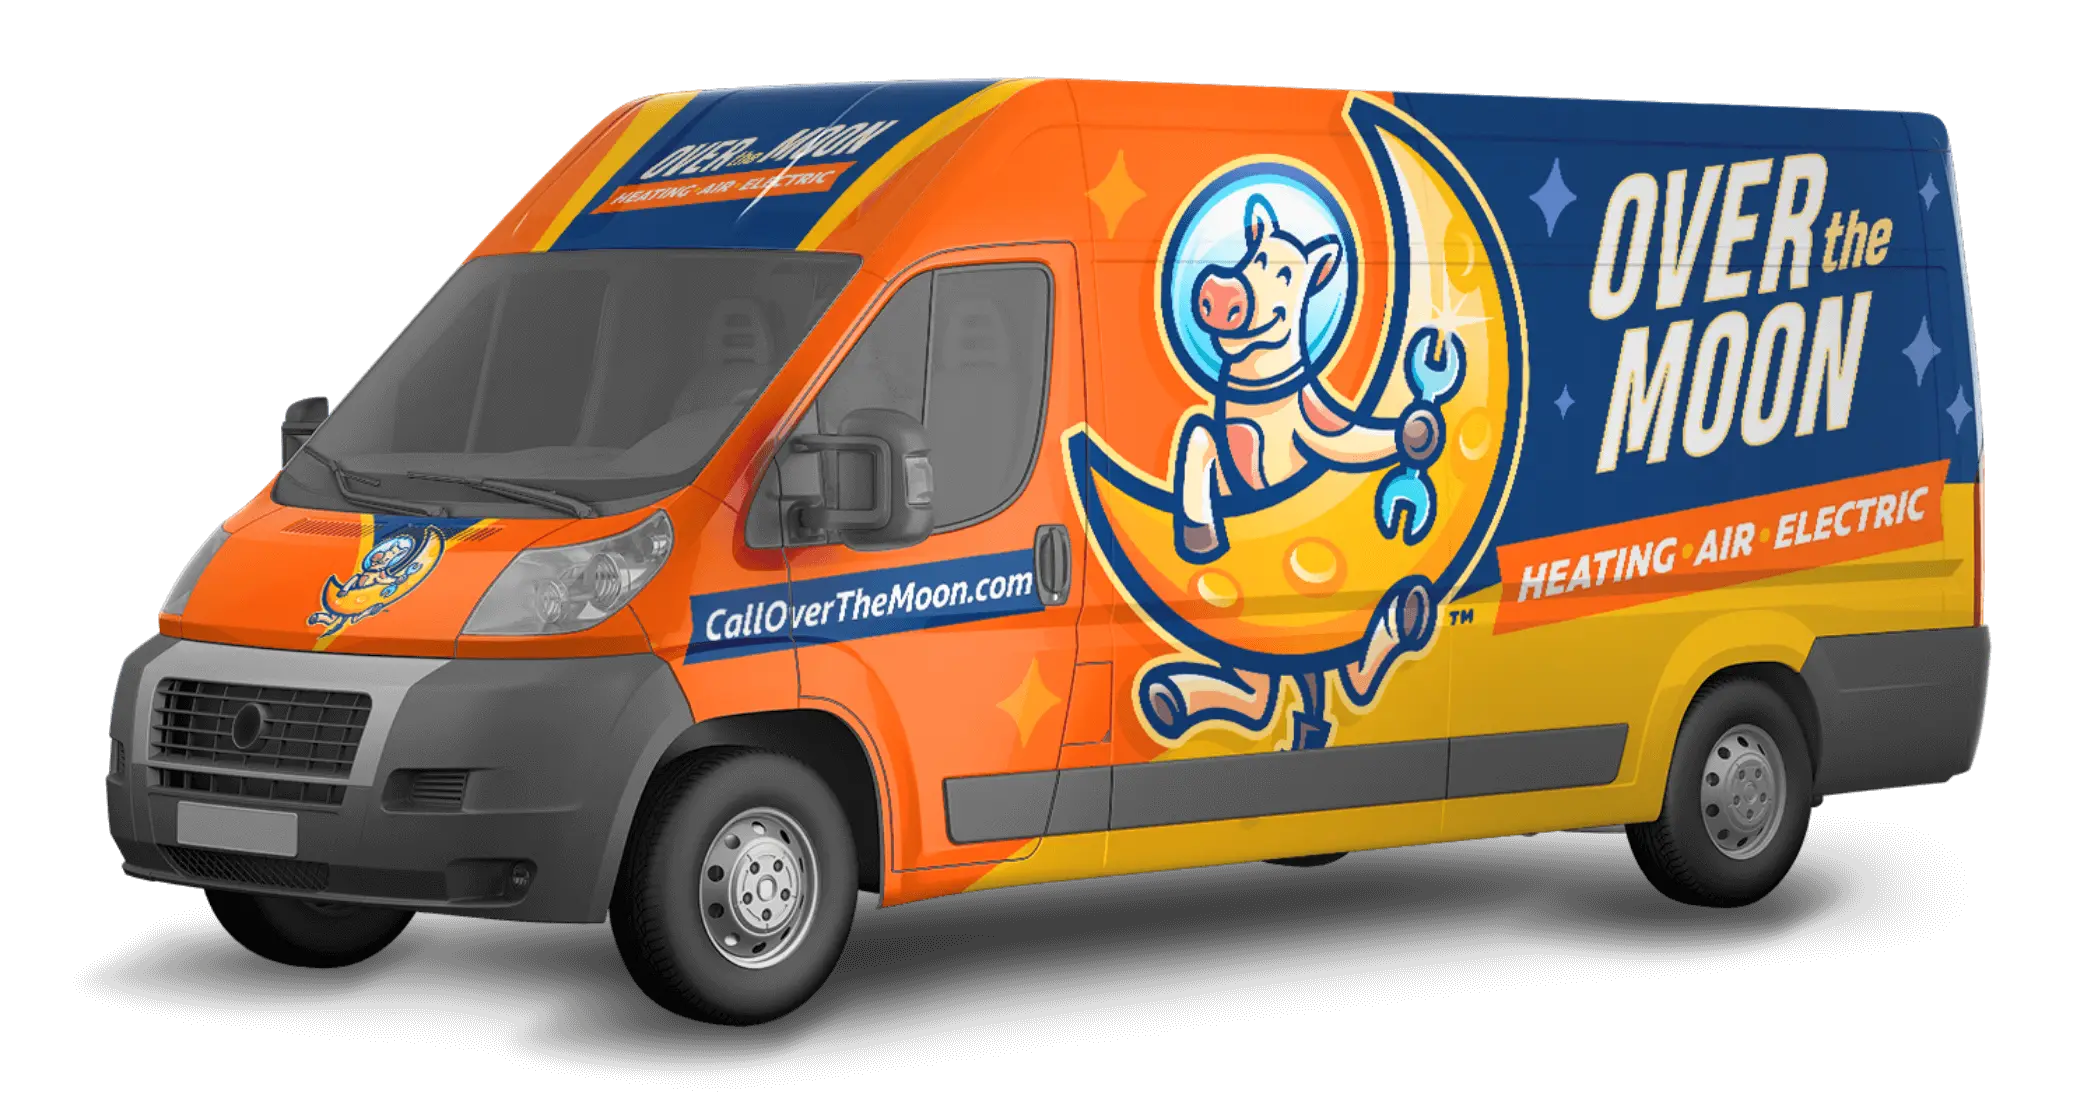 HVAC and Electrician Service Vehicle with Over the Moon Branding